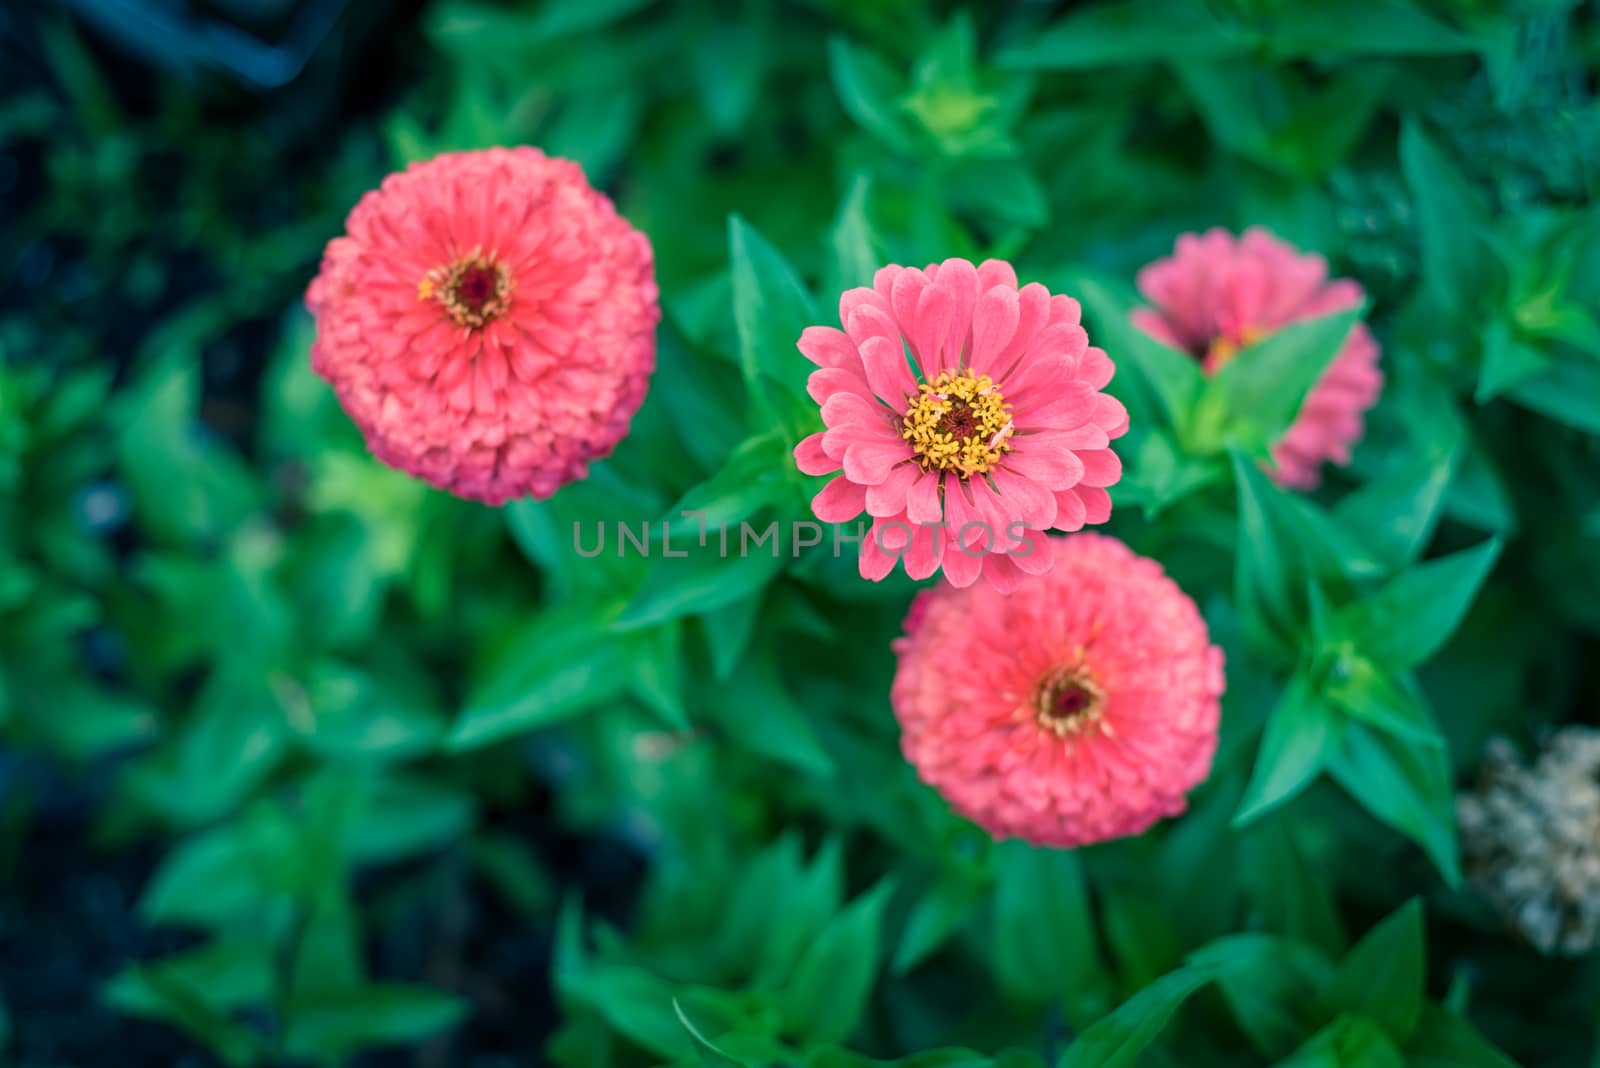 Blossom pink zinnia bush at flower bed in community allotment near Dallas, Texas, USA by trongnguyen